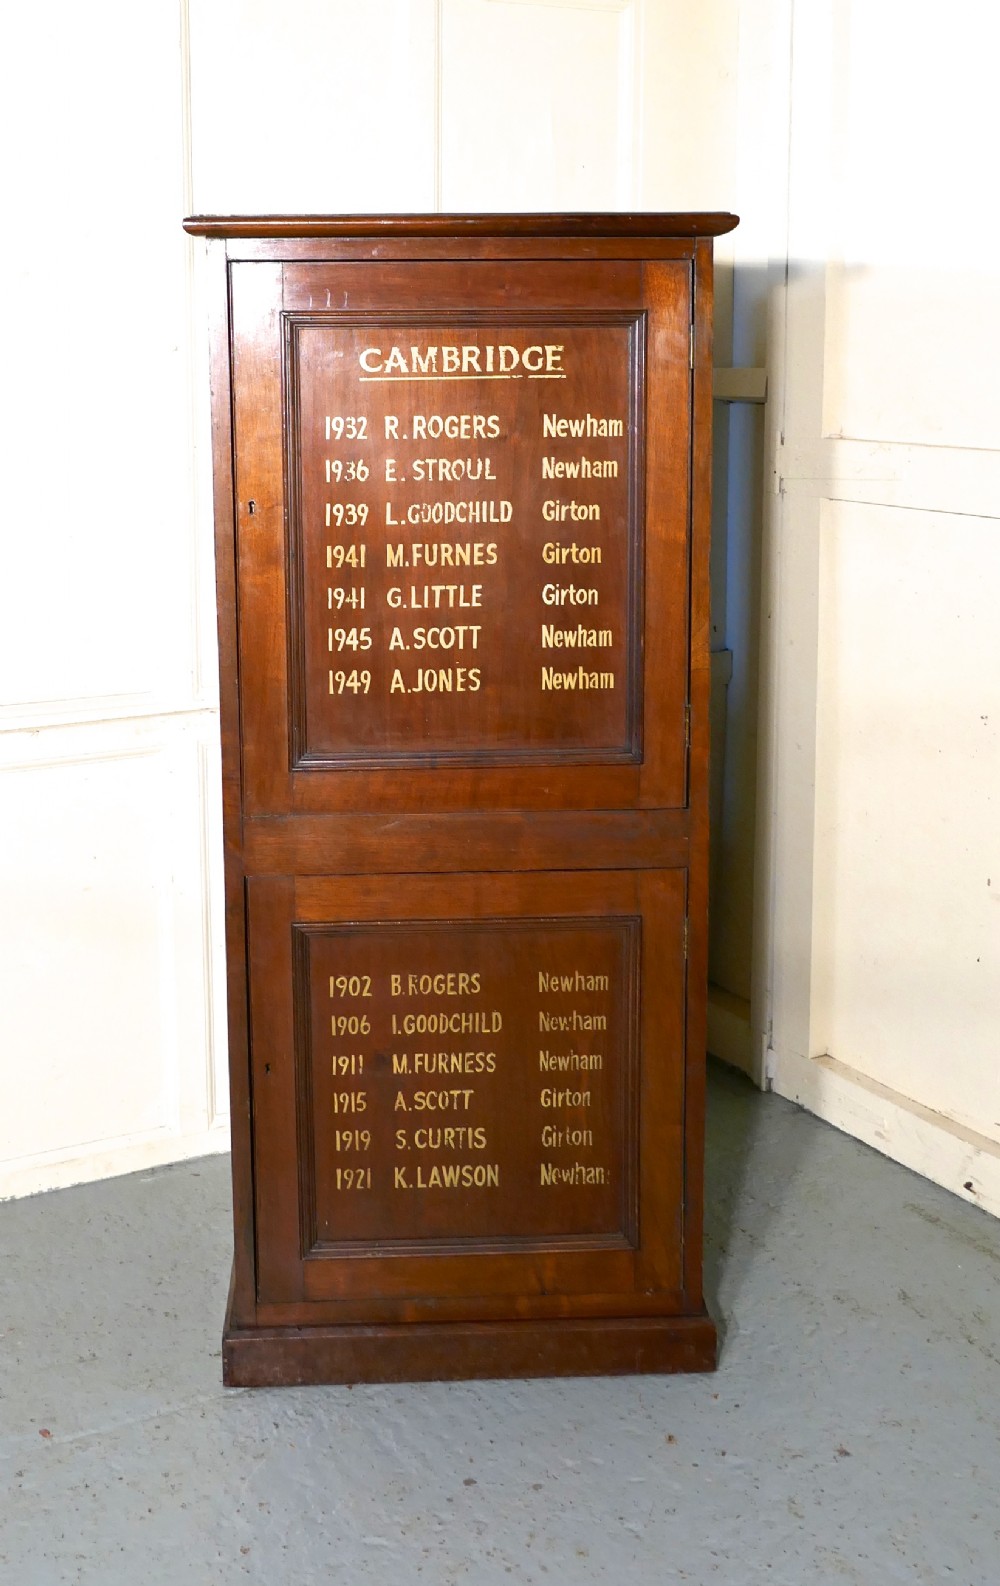 girton and newham hall book cupboard from cambridge university